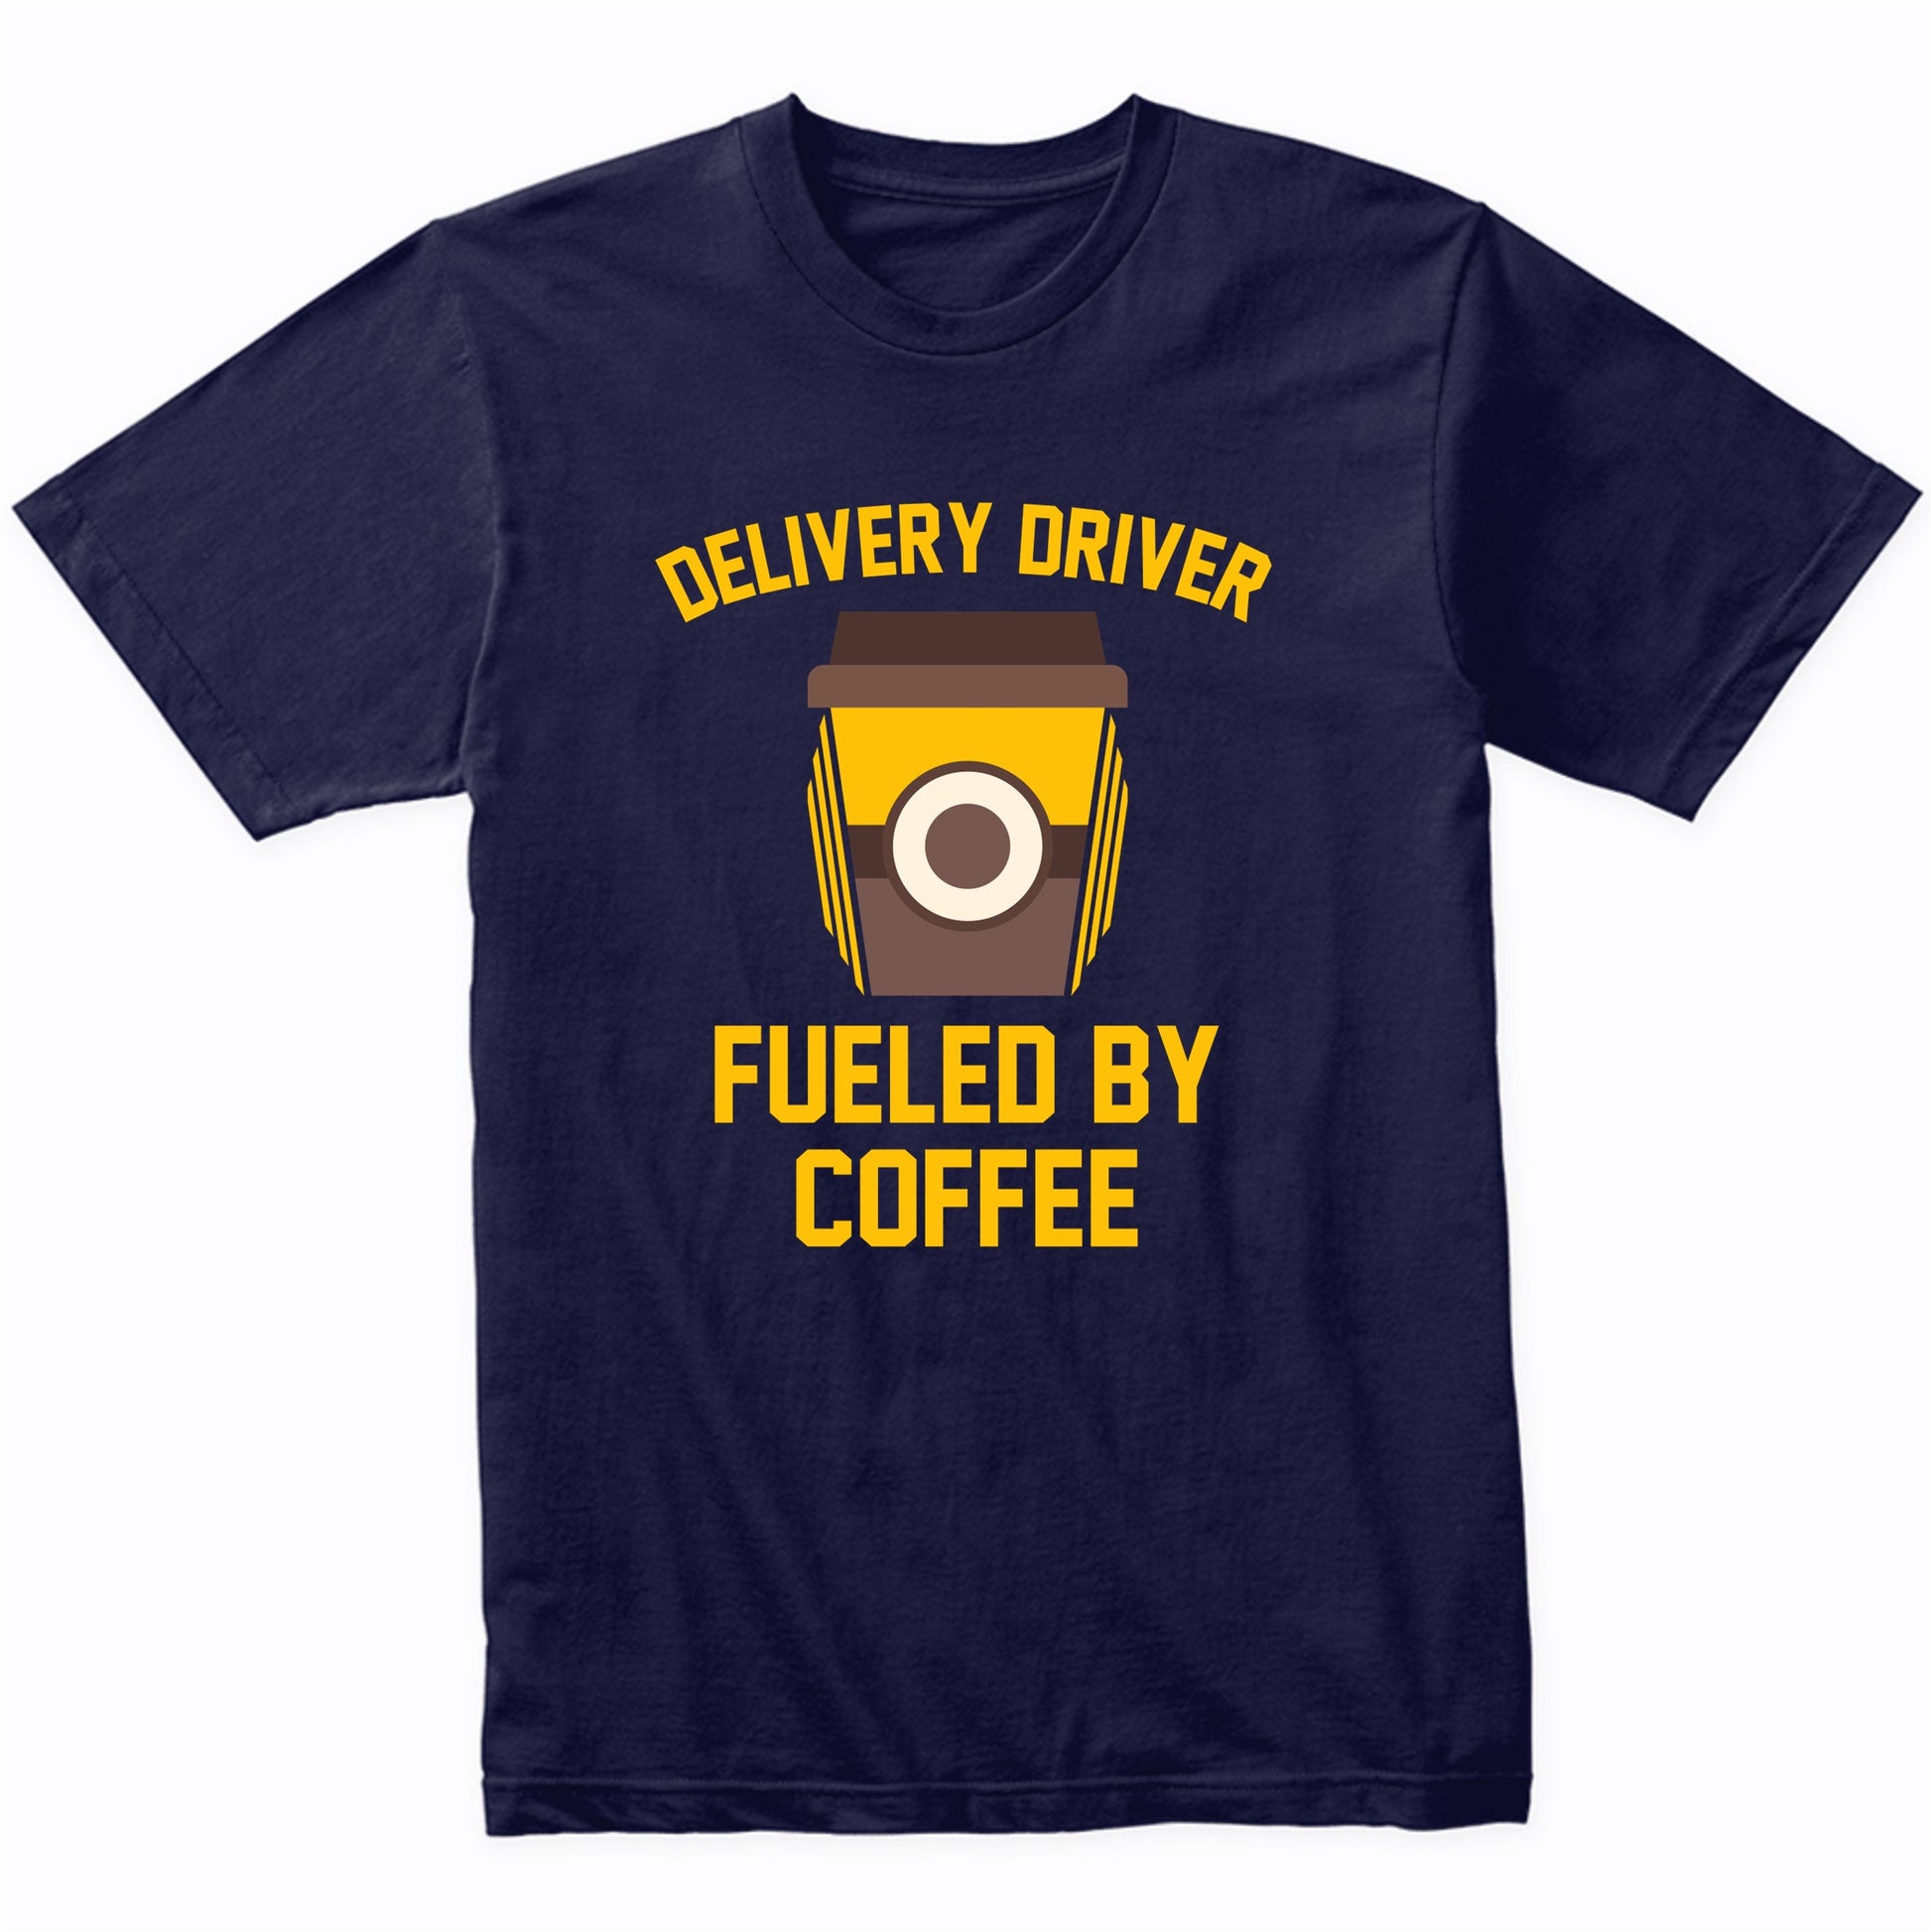 Delivery Driver Fueled By Coffee Funny Delivery Man Shirt